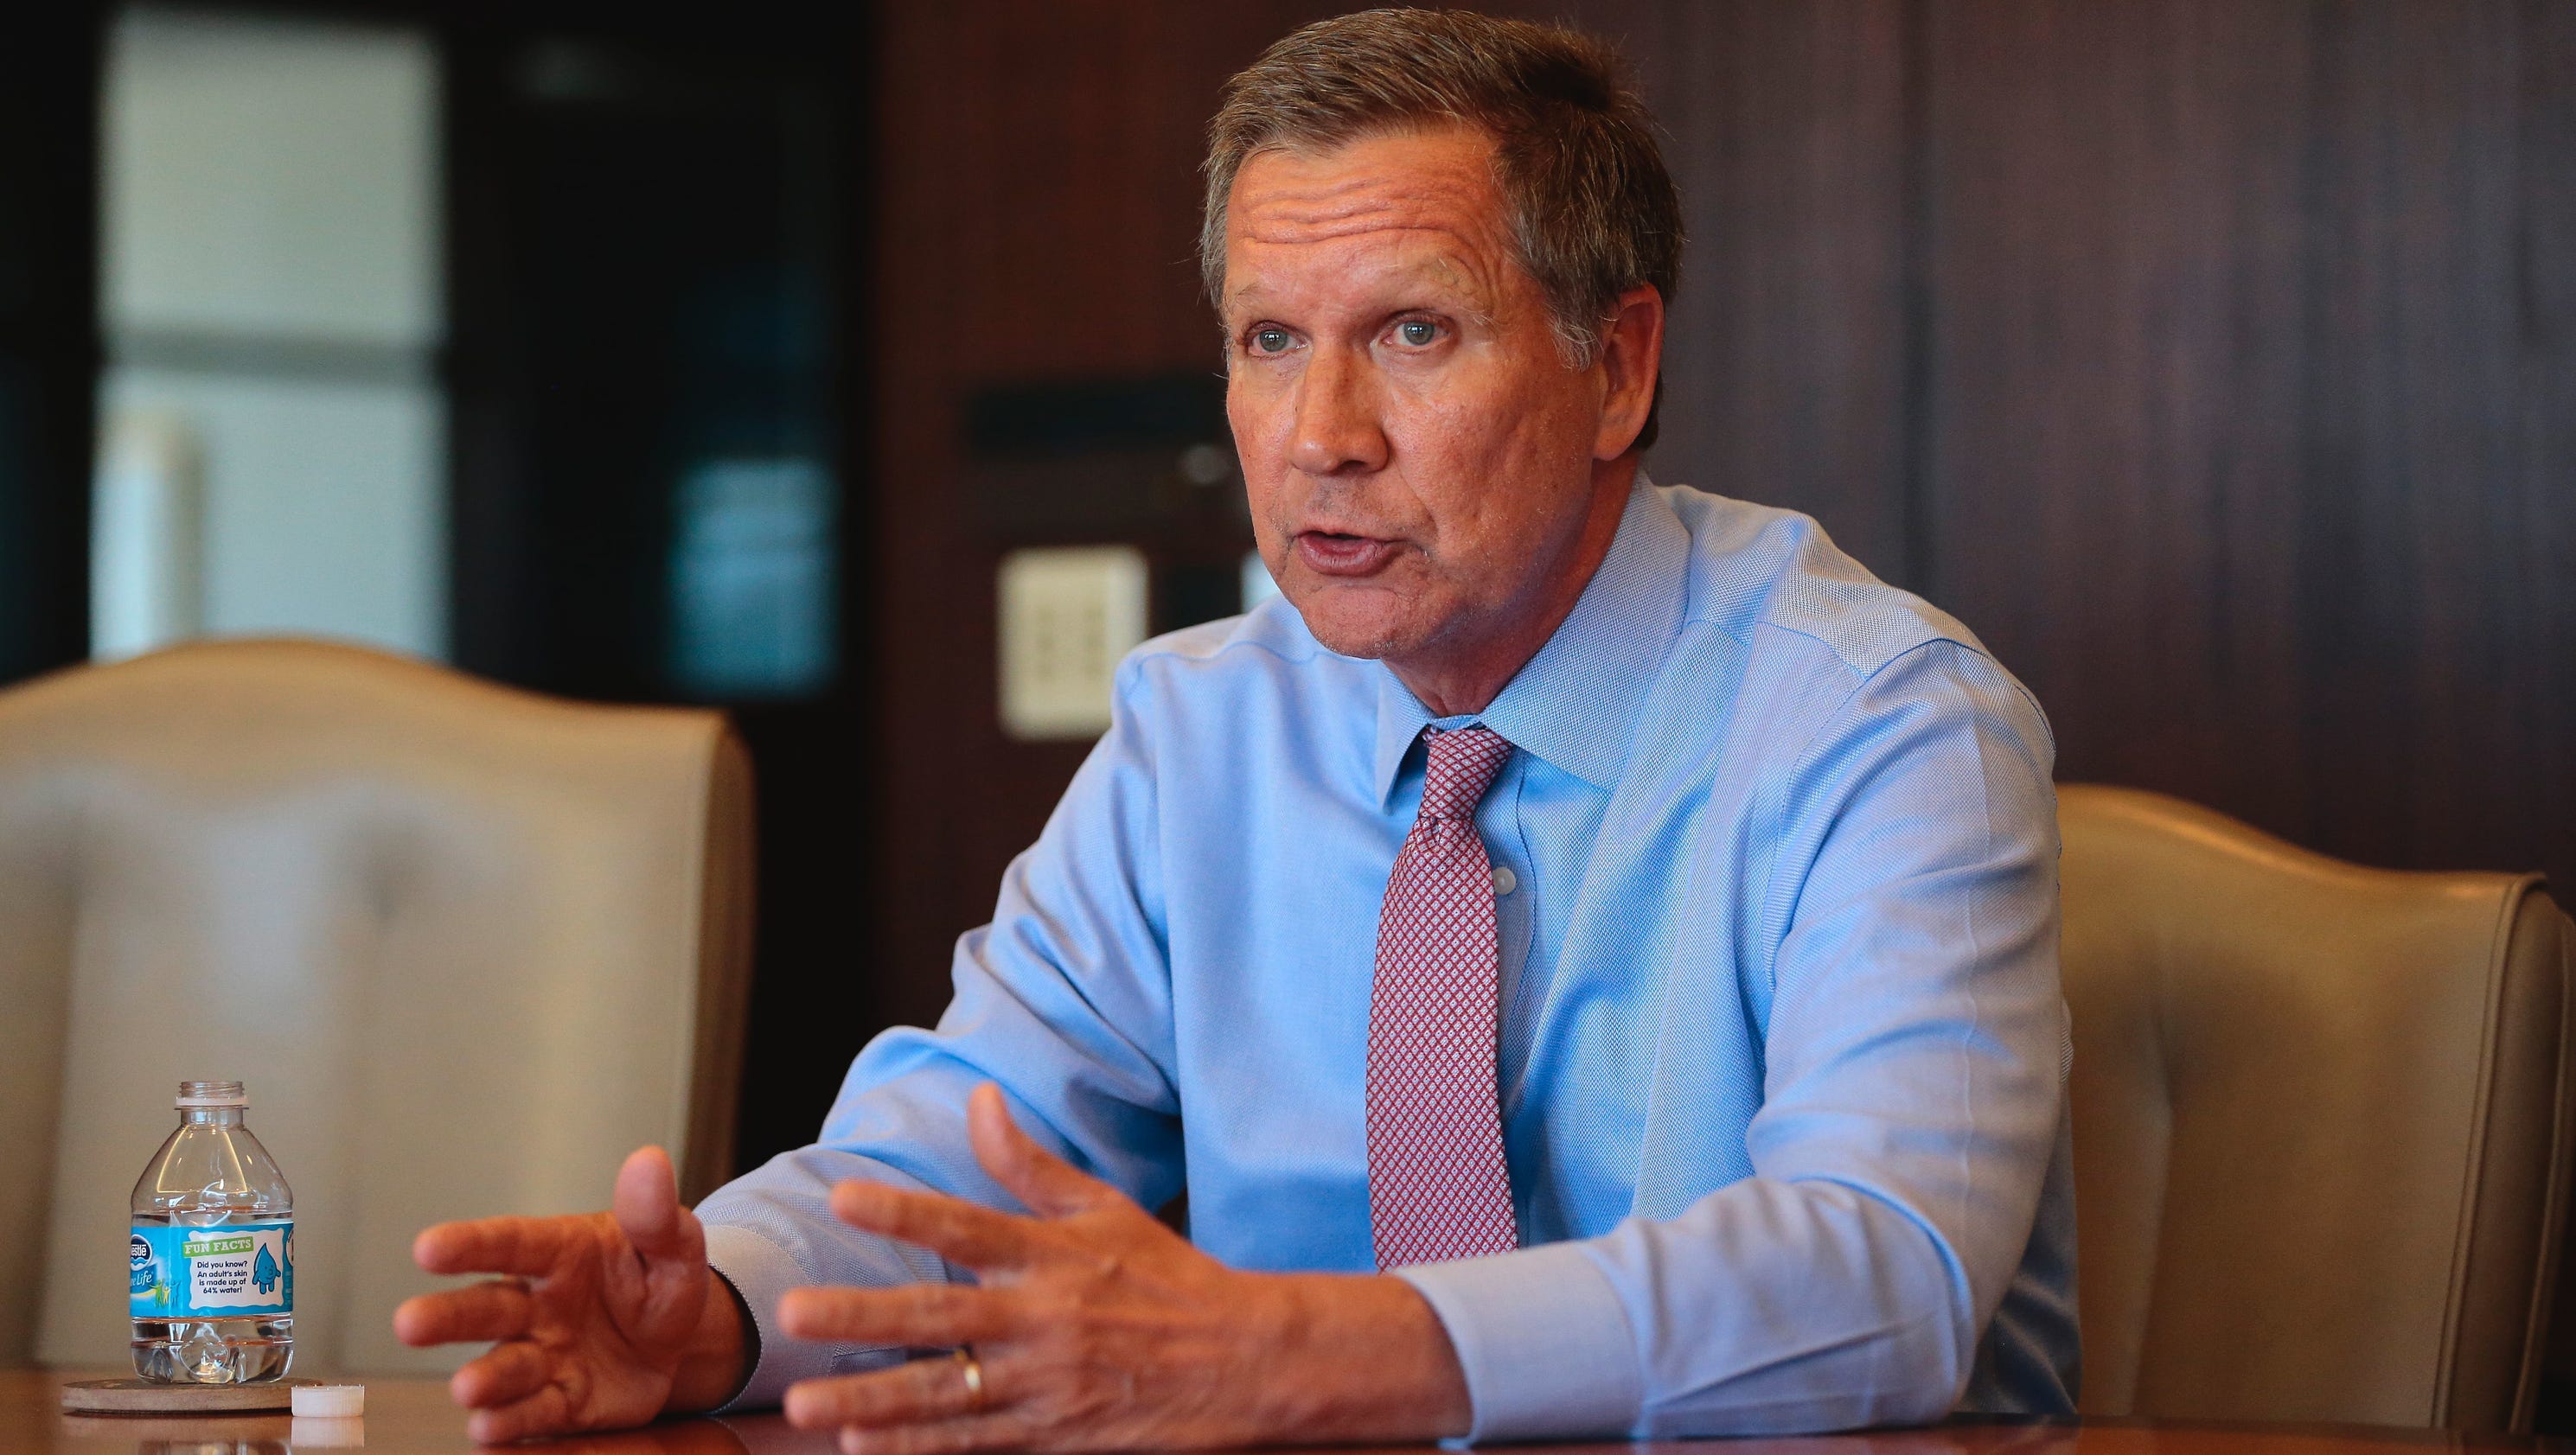 Kasich: I sent Ohio troopers to assist with security at Dakota Access ...